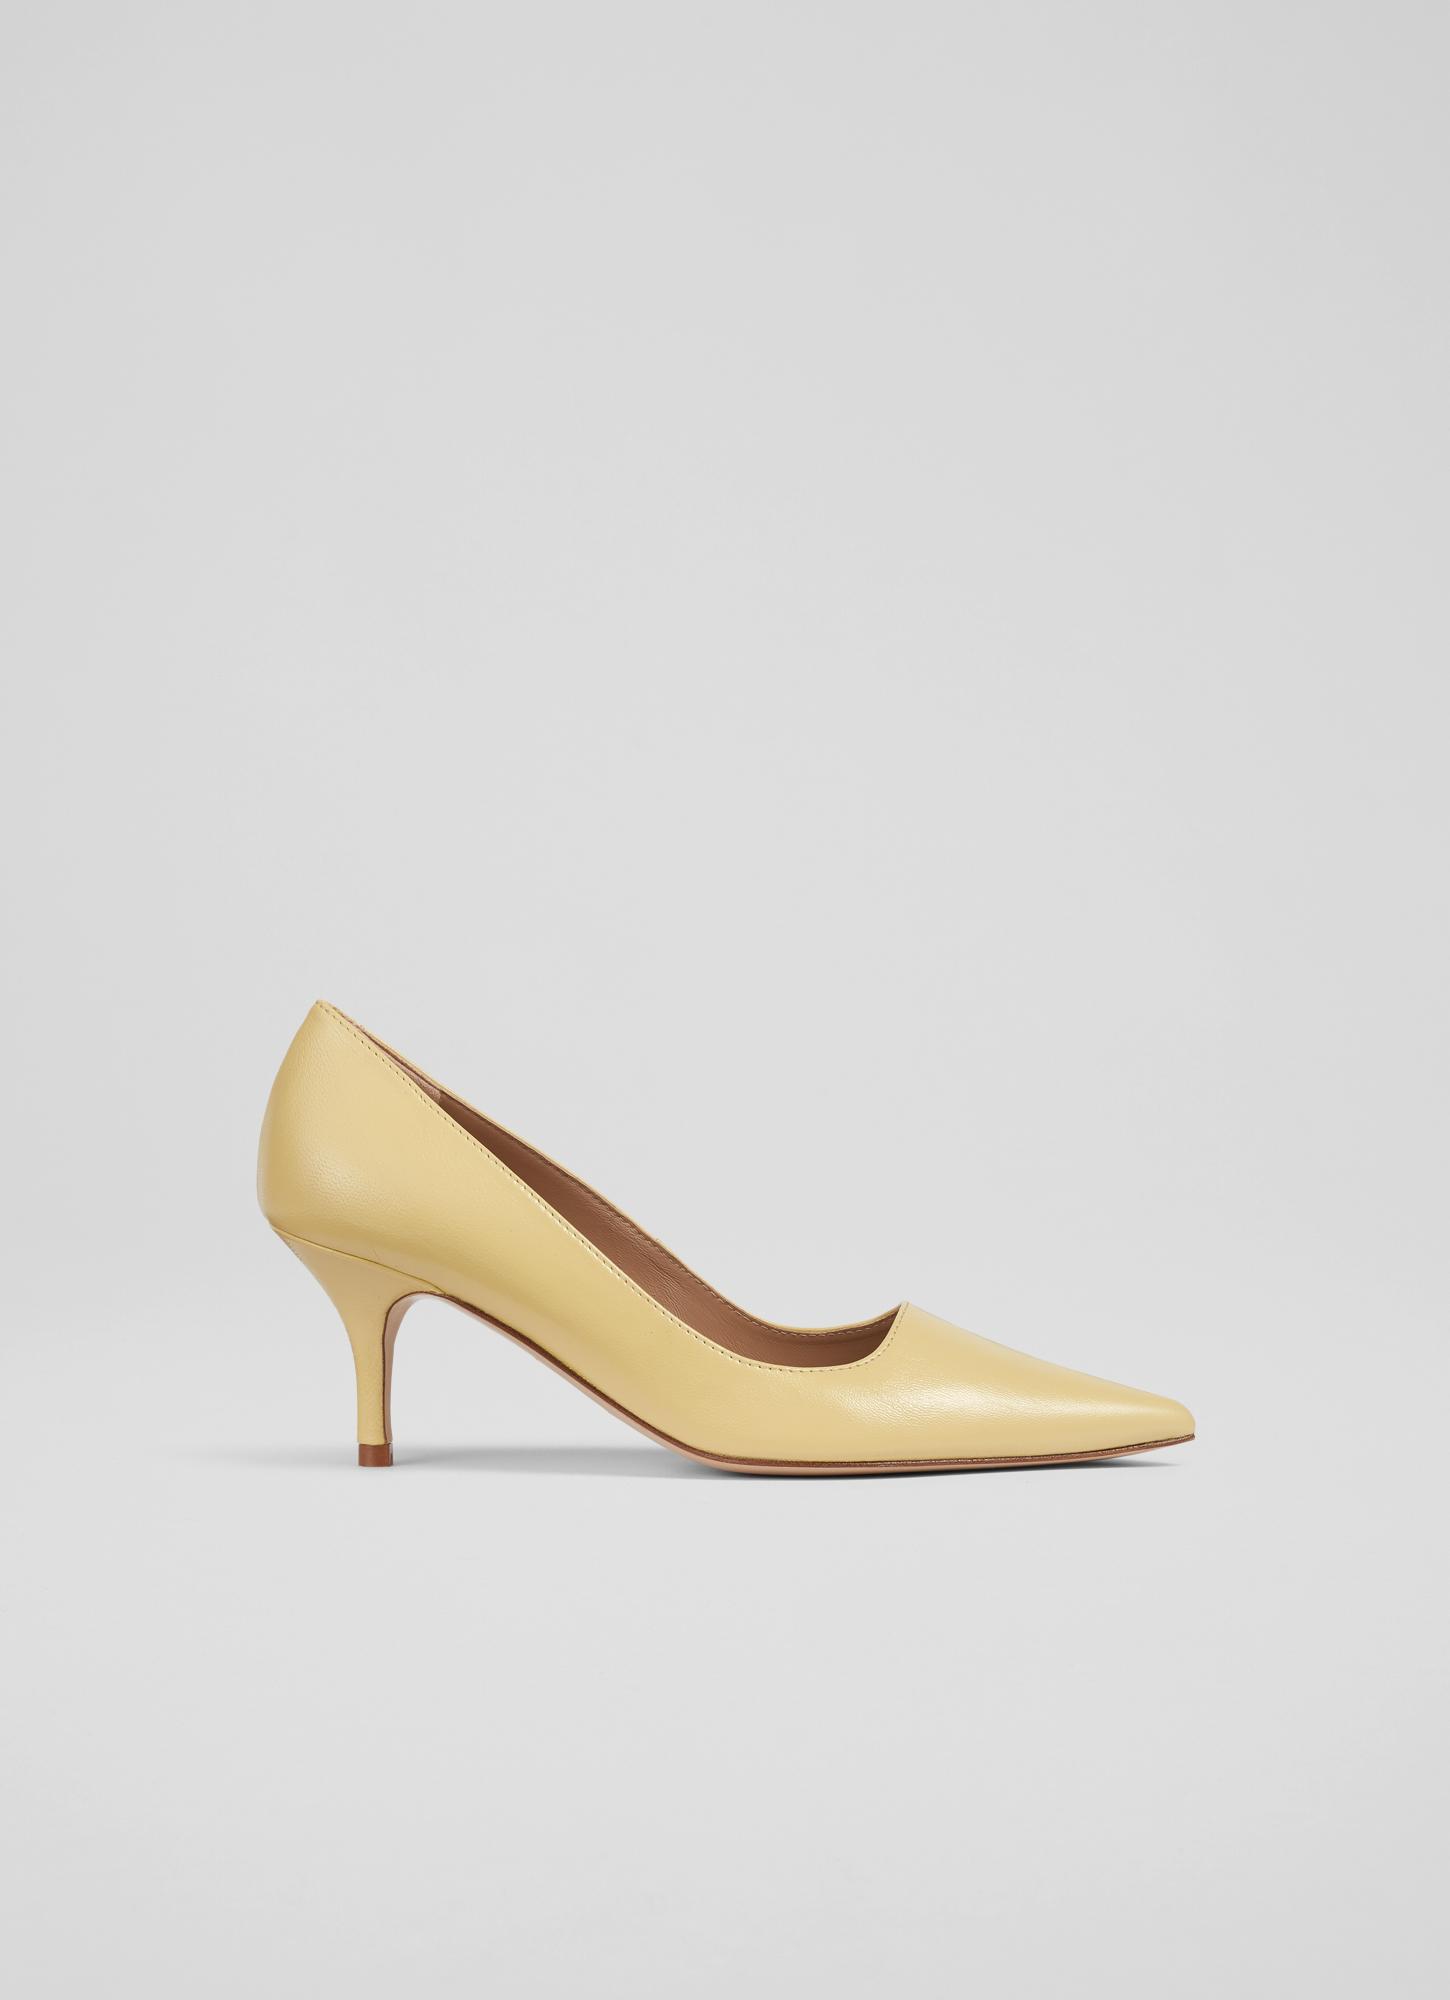 L.K.Bennett Beatrice Pale Yellow Leather Pointed Toe Courts, Yellow